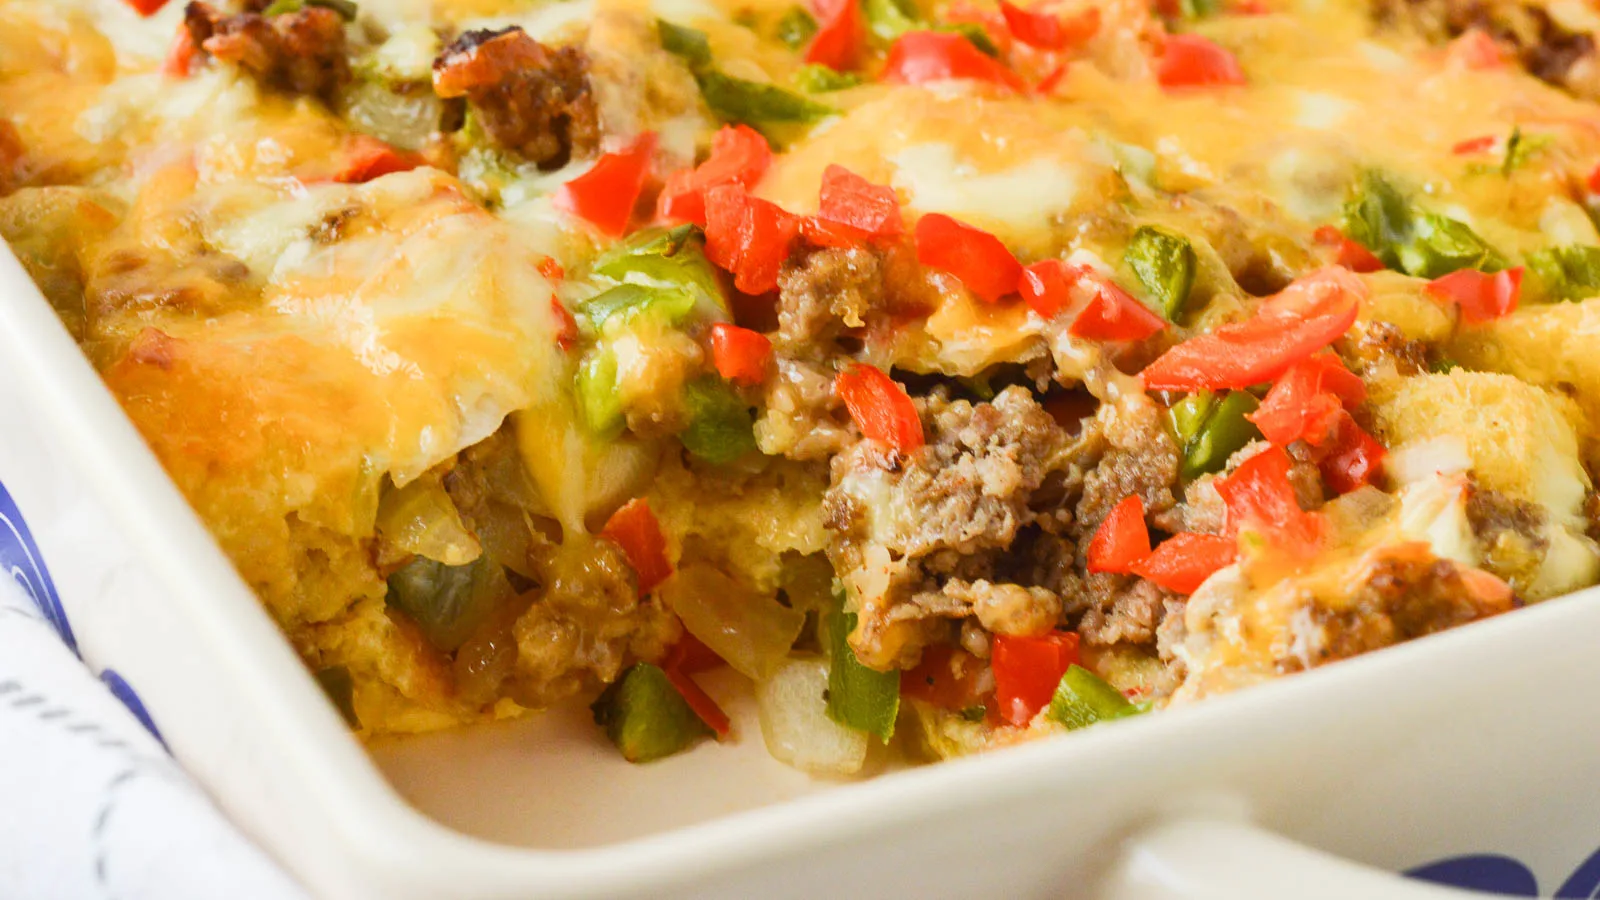 A close up image of a sausage strata, sliced, so that you can see the crumbled, cooked sausage, onions, peppers, and cheese spilling out into the empty space of the casserole dish